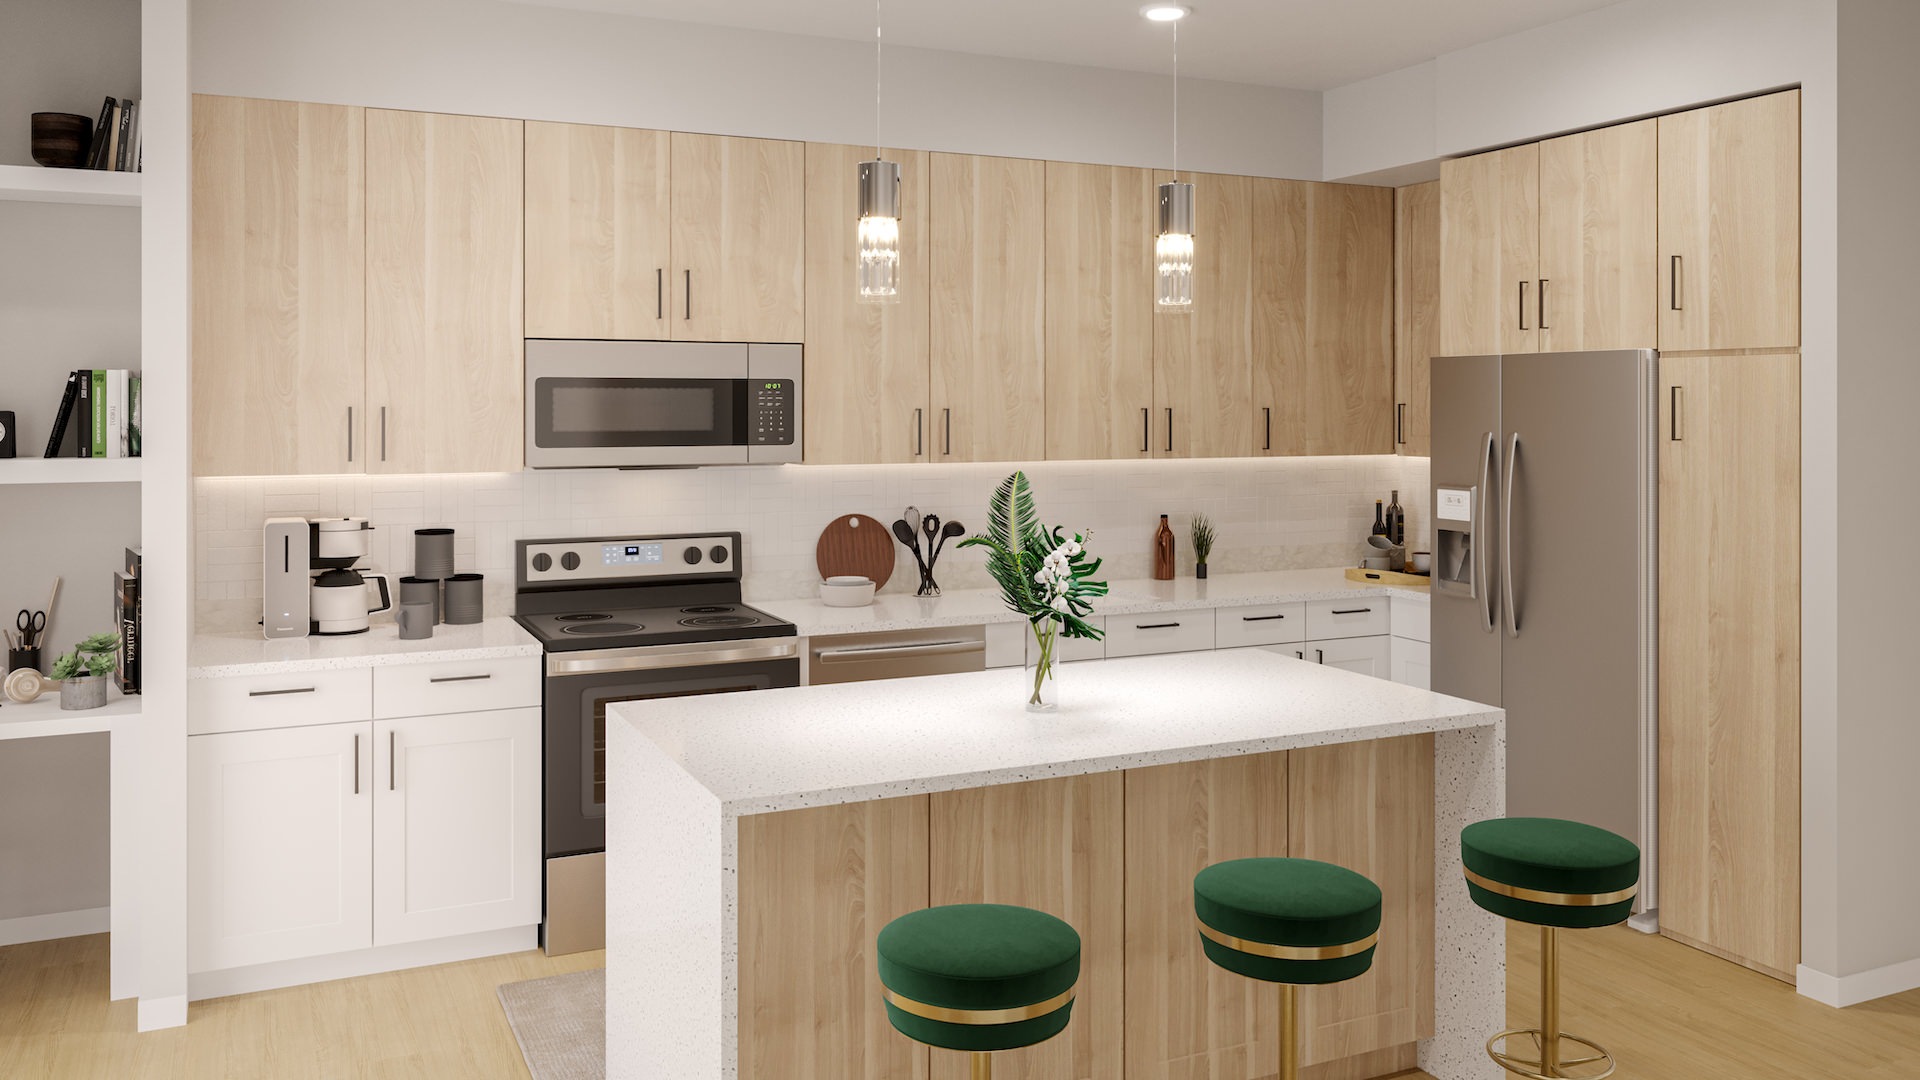 Model kitchen at our apartments for rent in Phoenix, AZ, featuring stainless steel appliances and a kitchen island.